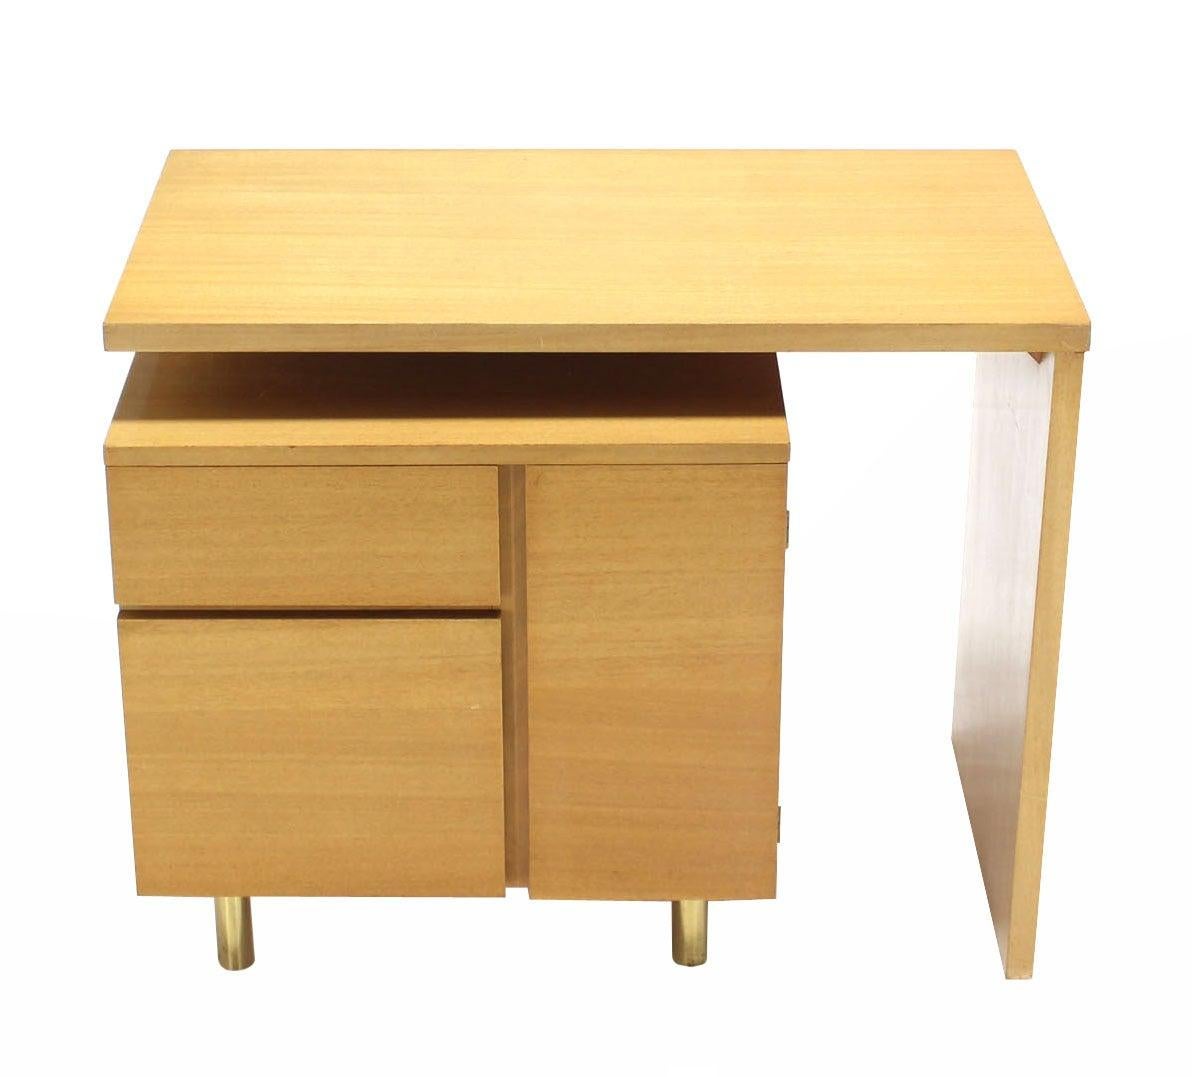 Revolving Folding Mid-Century Modern Desk Writing Table Cabinet Hide Away MINT In Excellent Condition For Sale In Rockaway, NJ